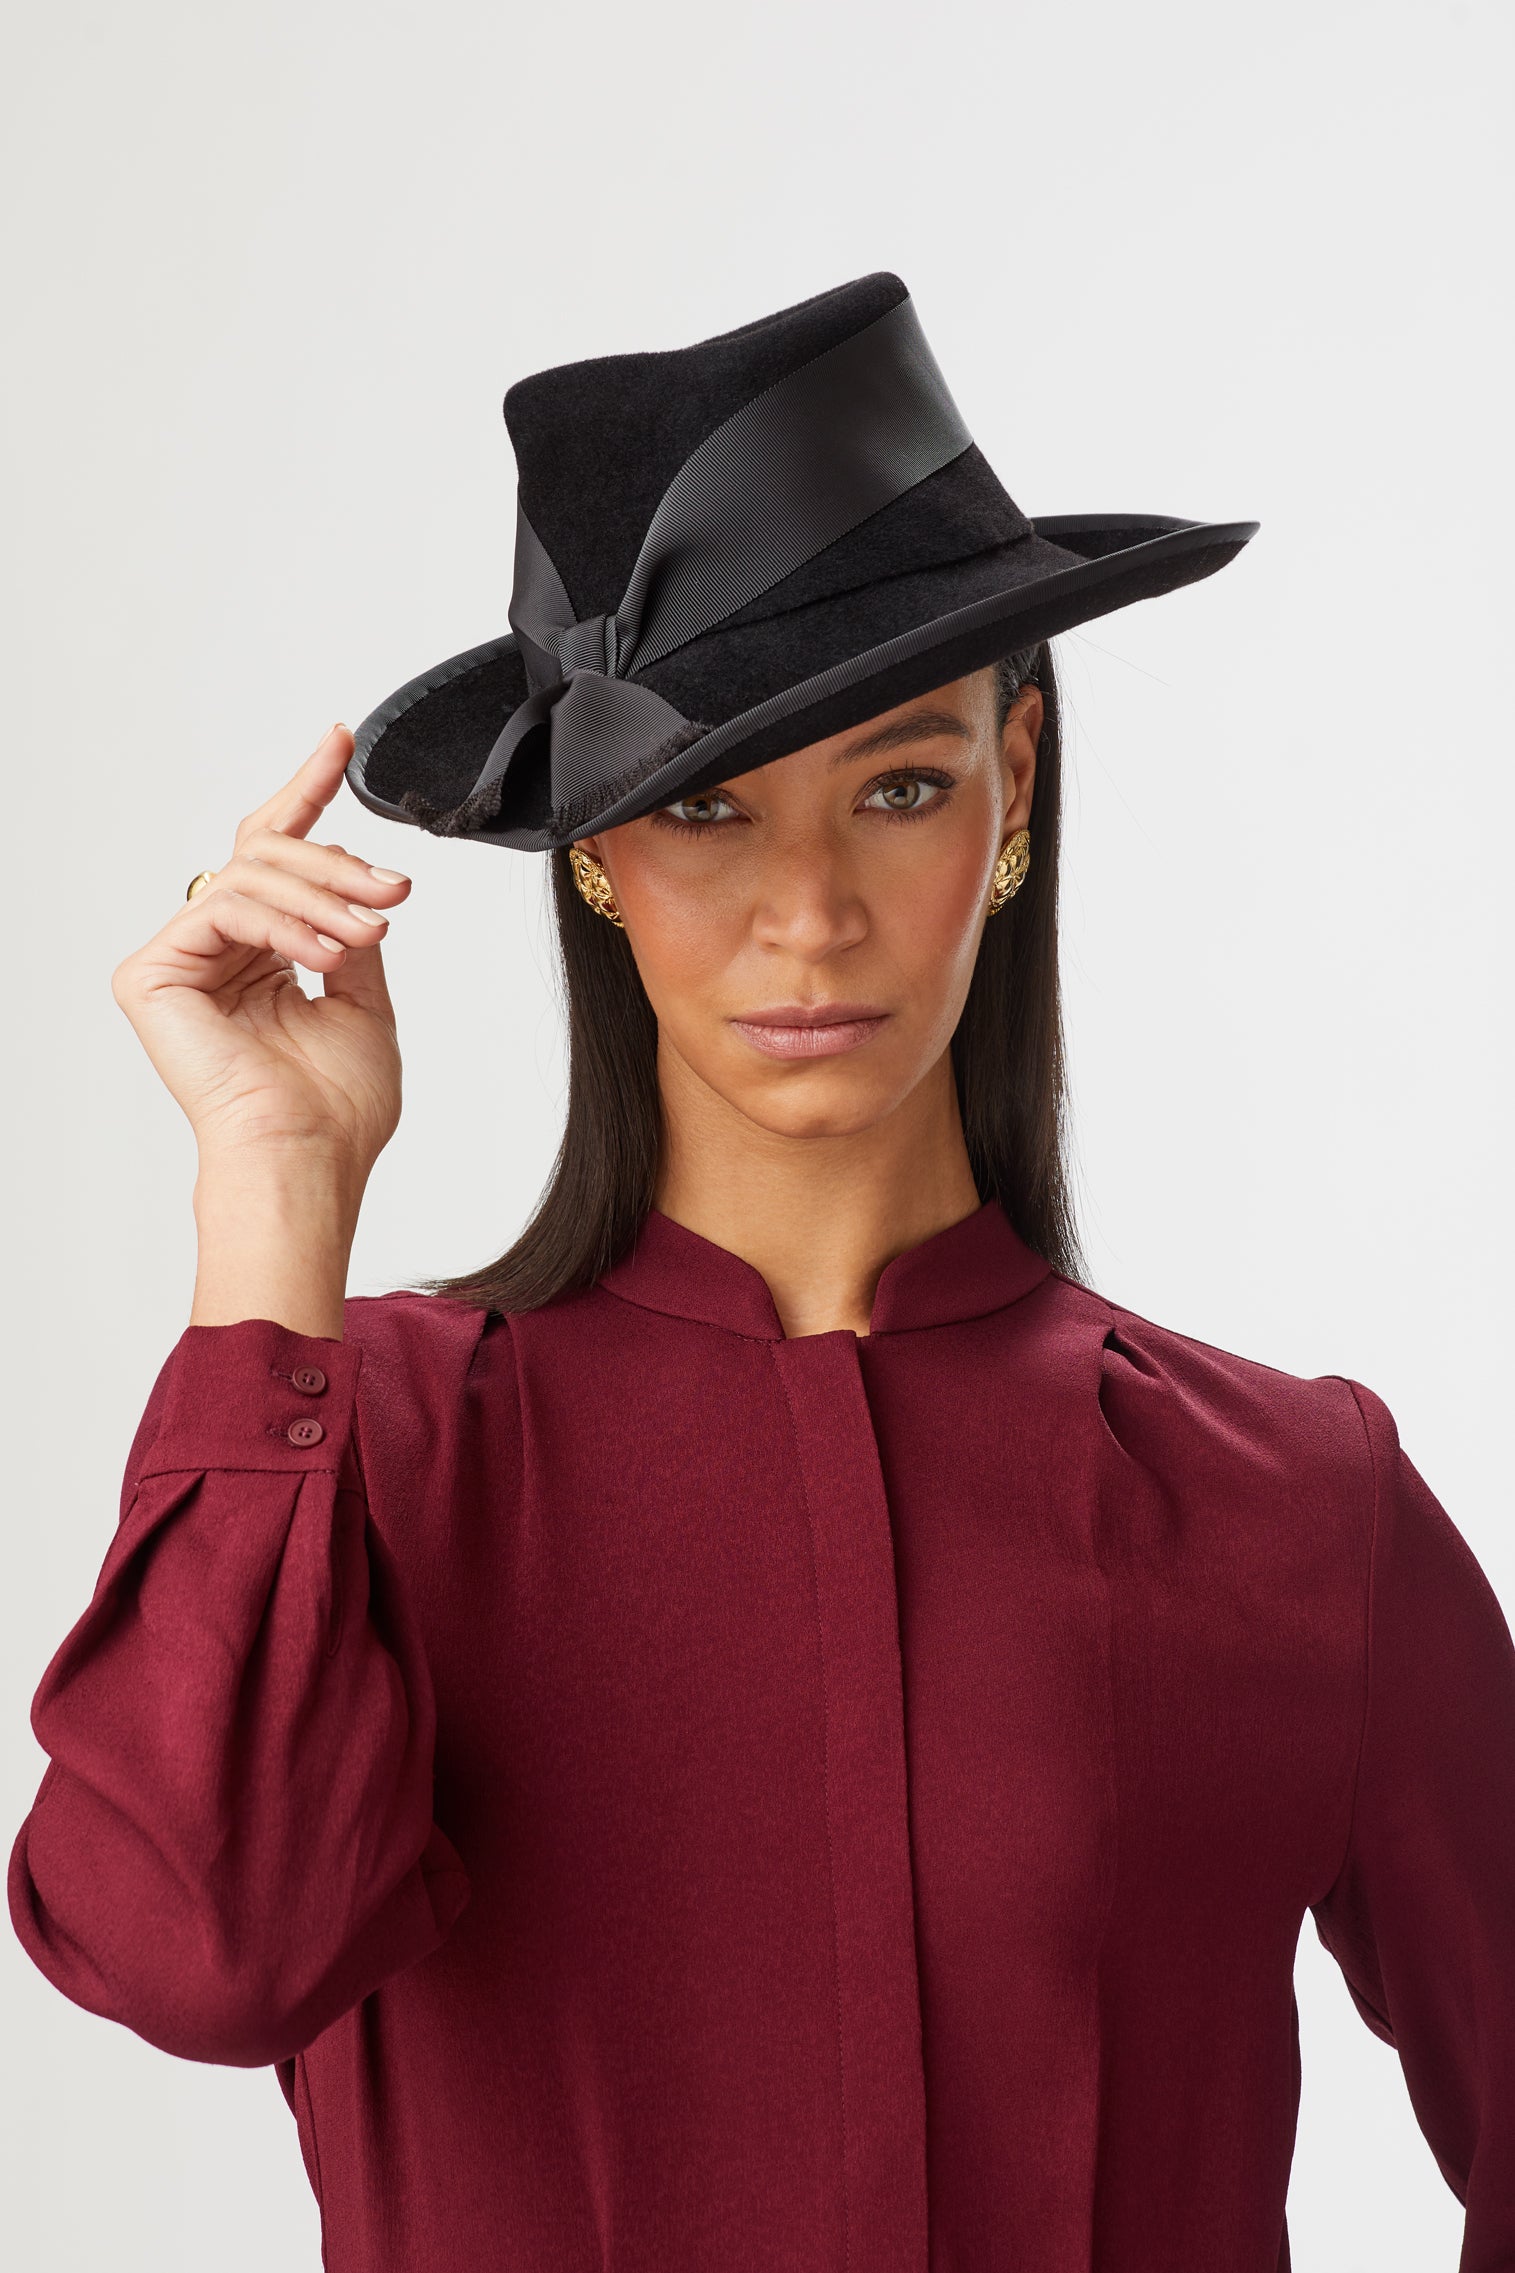 Women's Packable and Rollable Hats - Lock & Co. Hatters